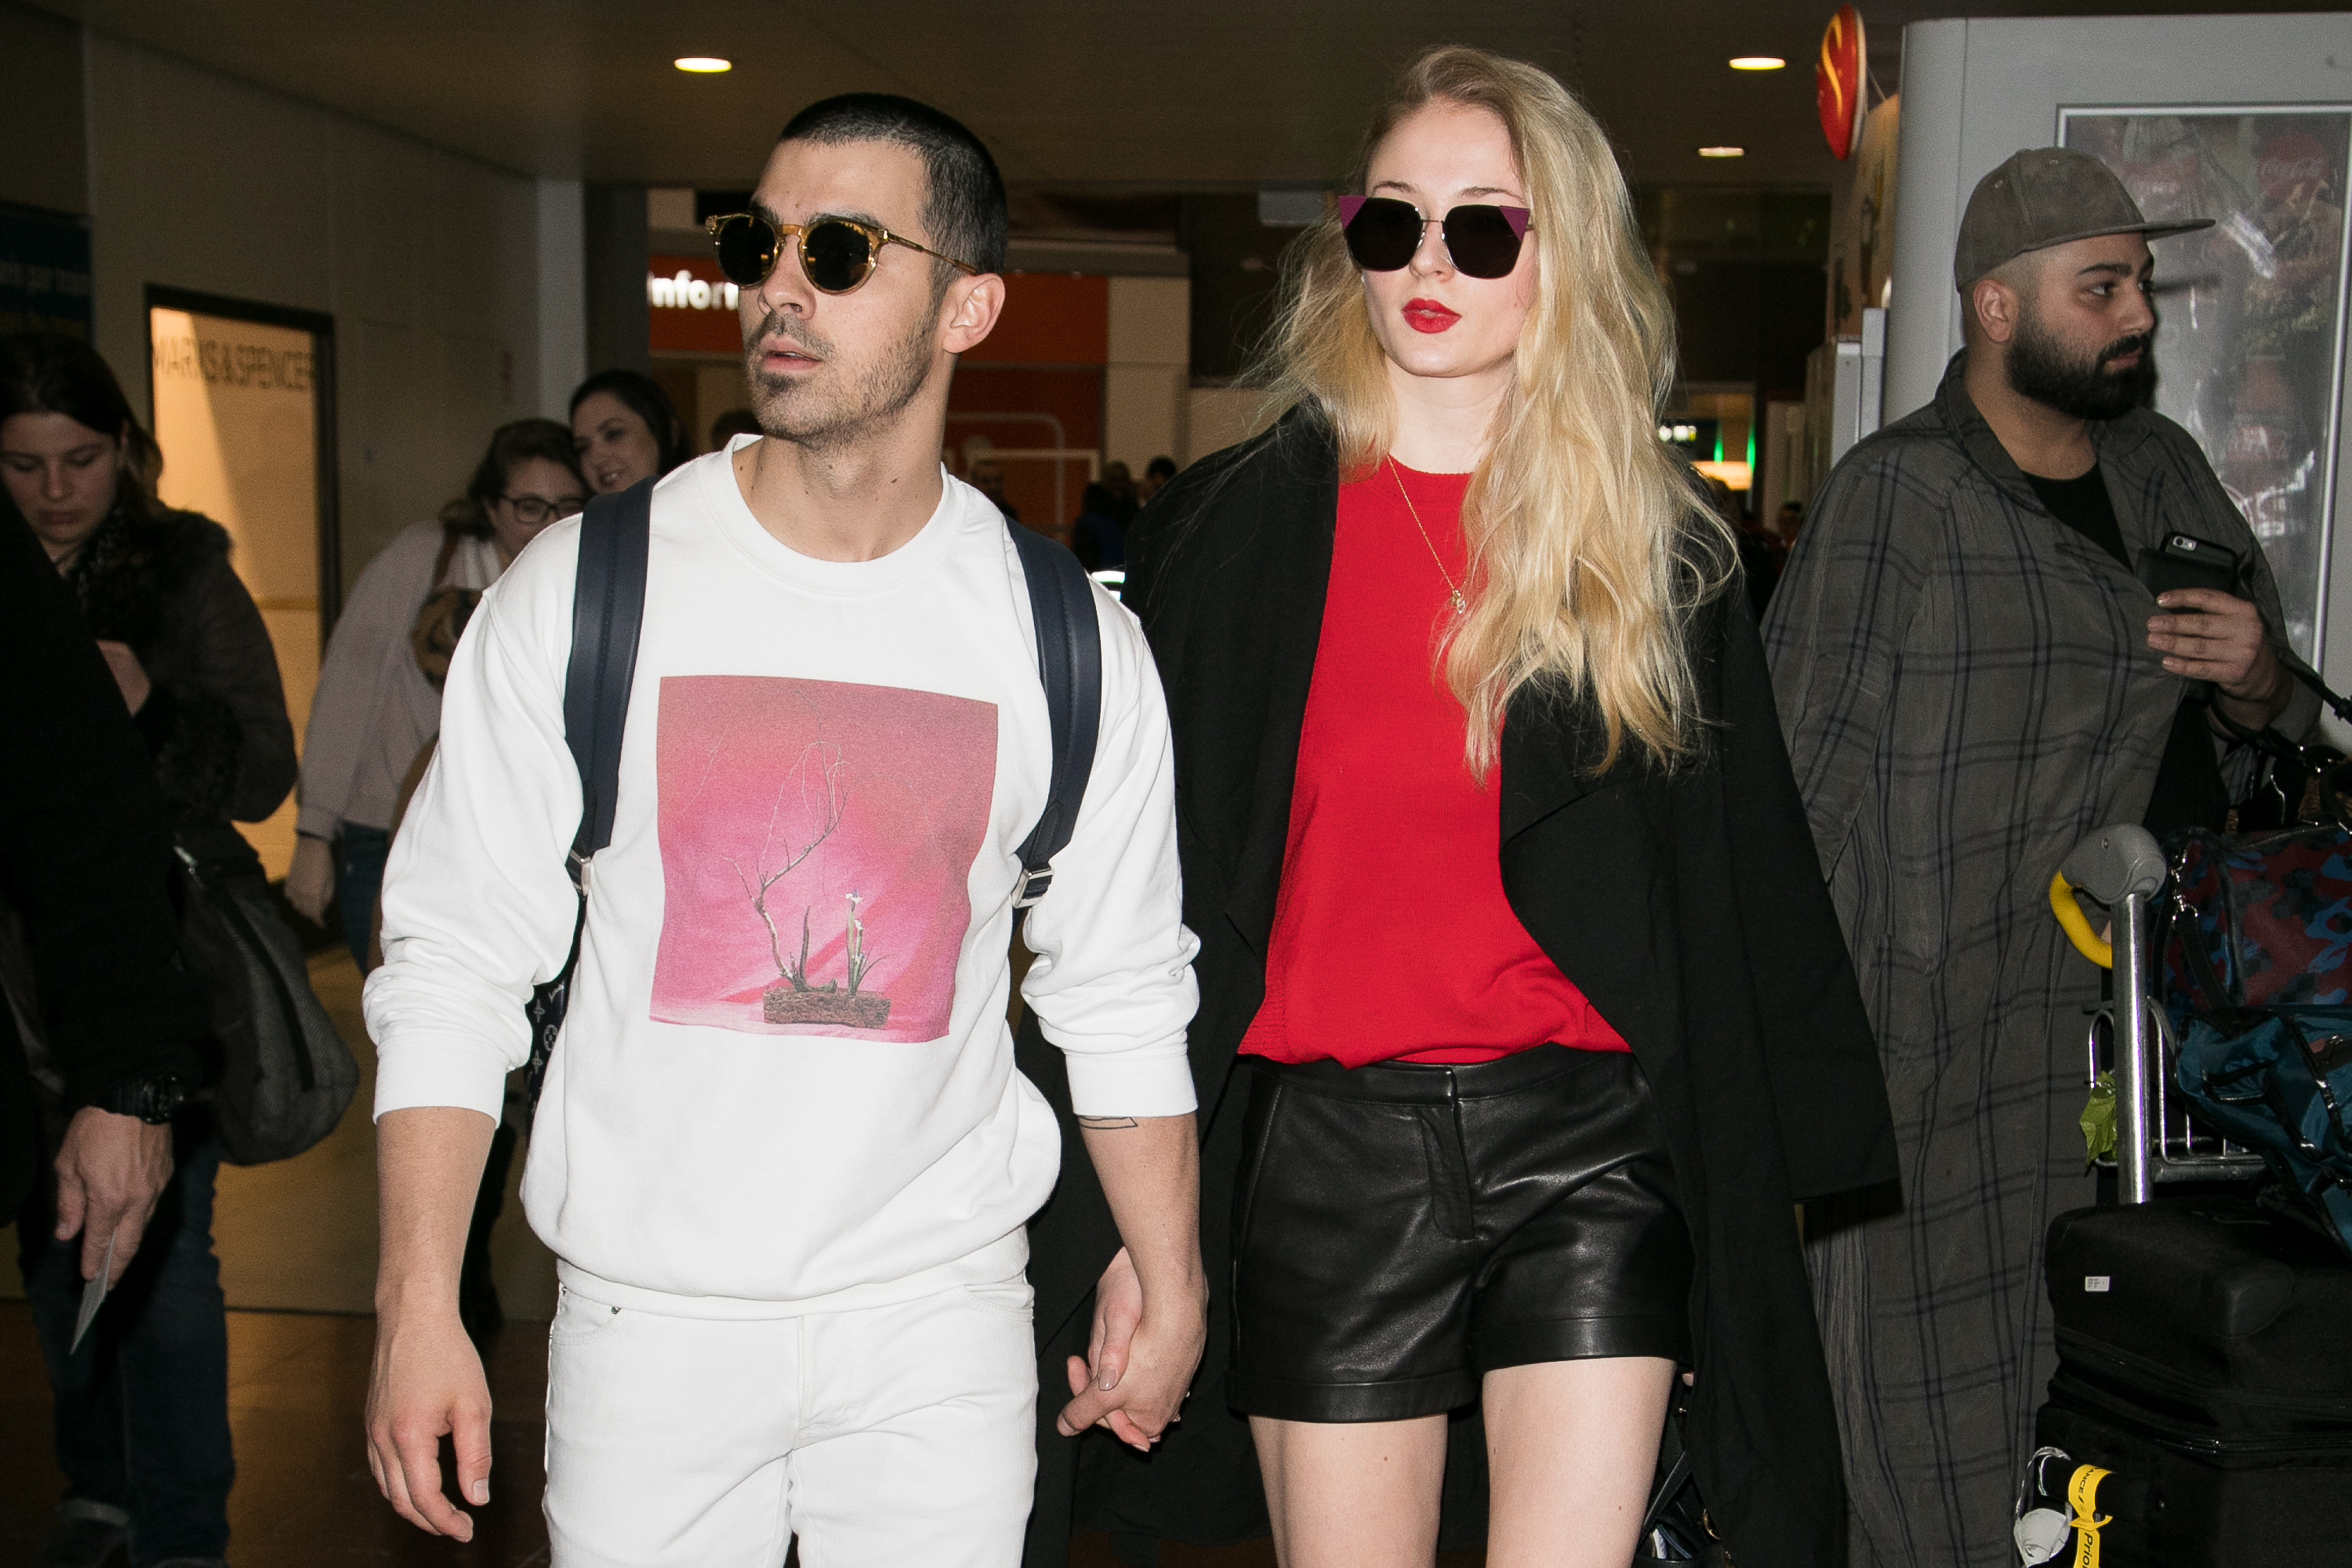 Joe and Sophie walking through the airport hand-in-hand